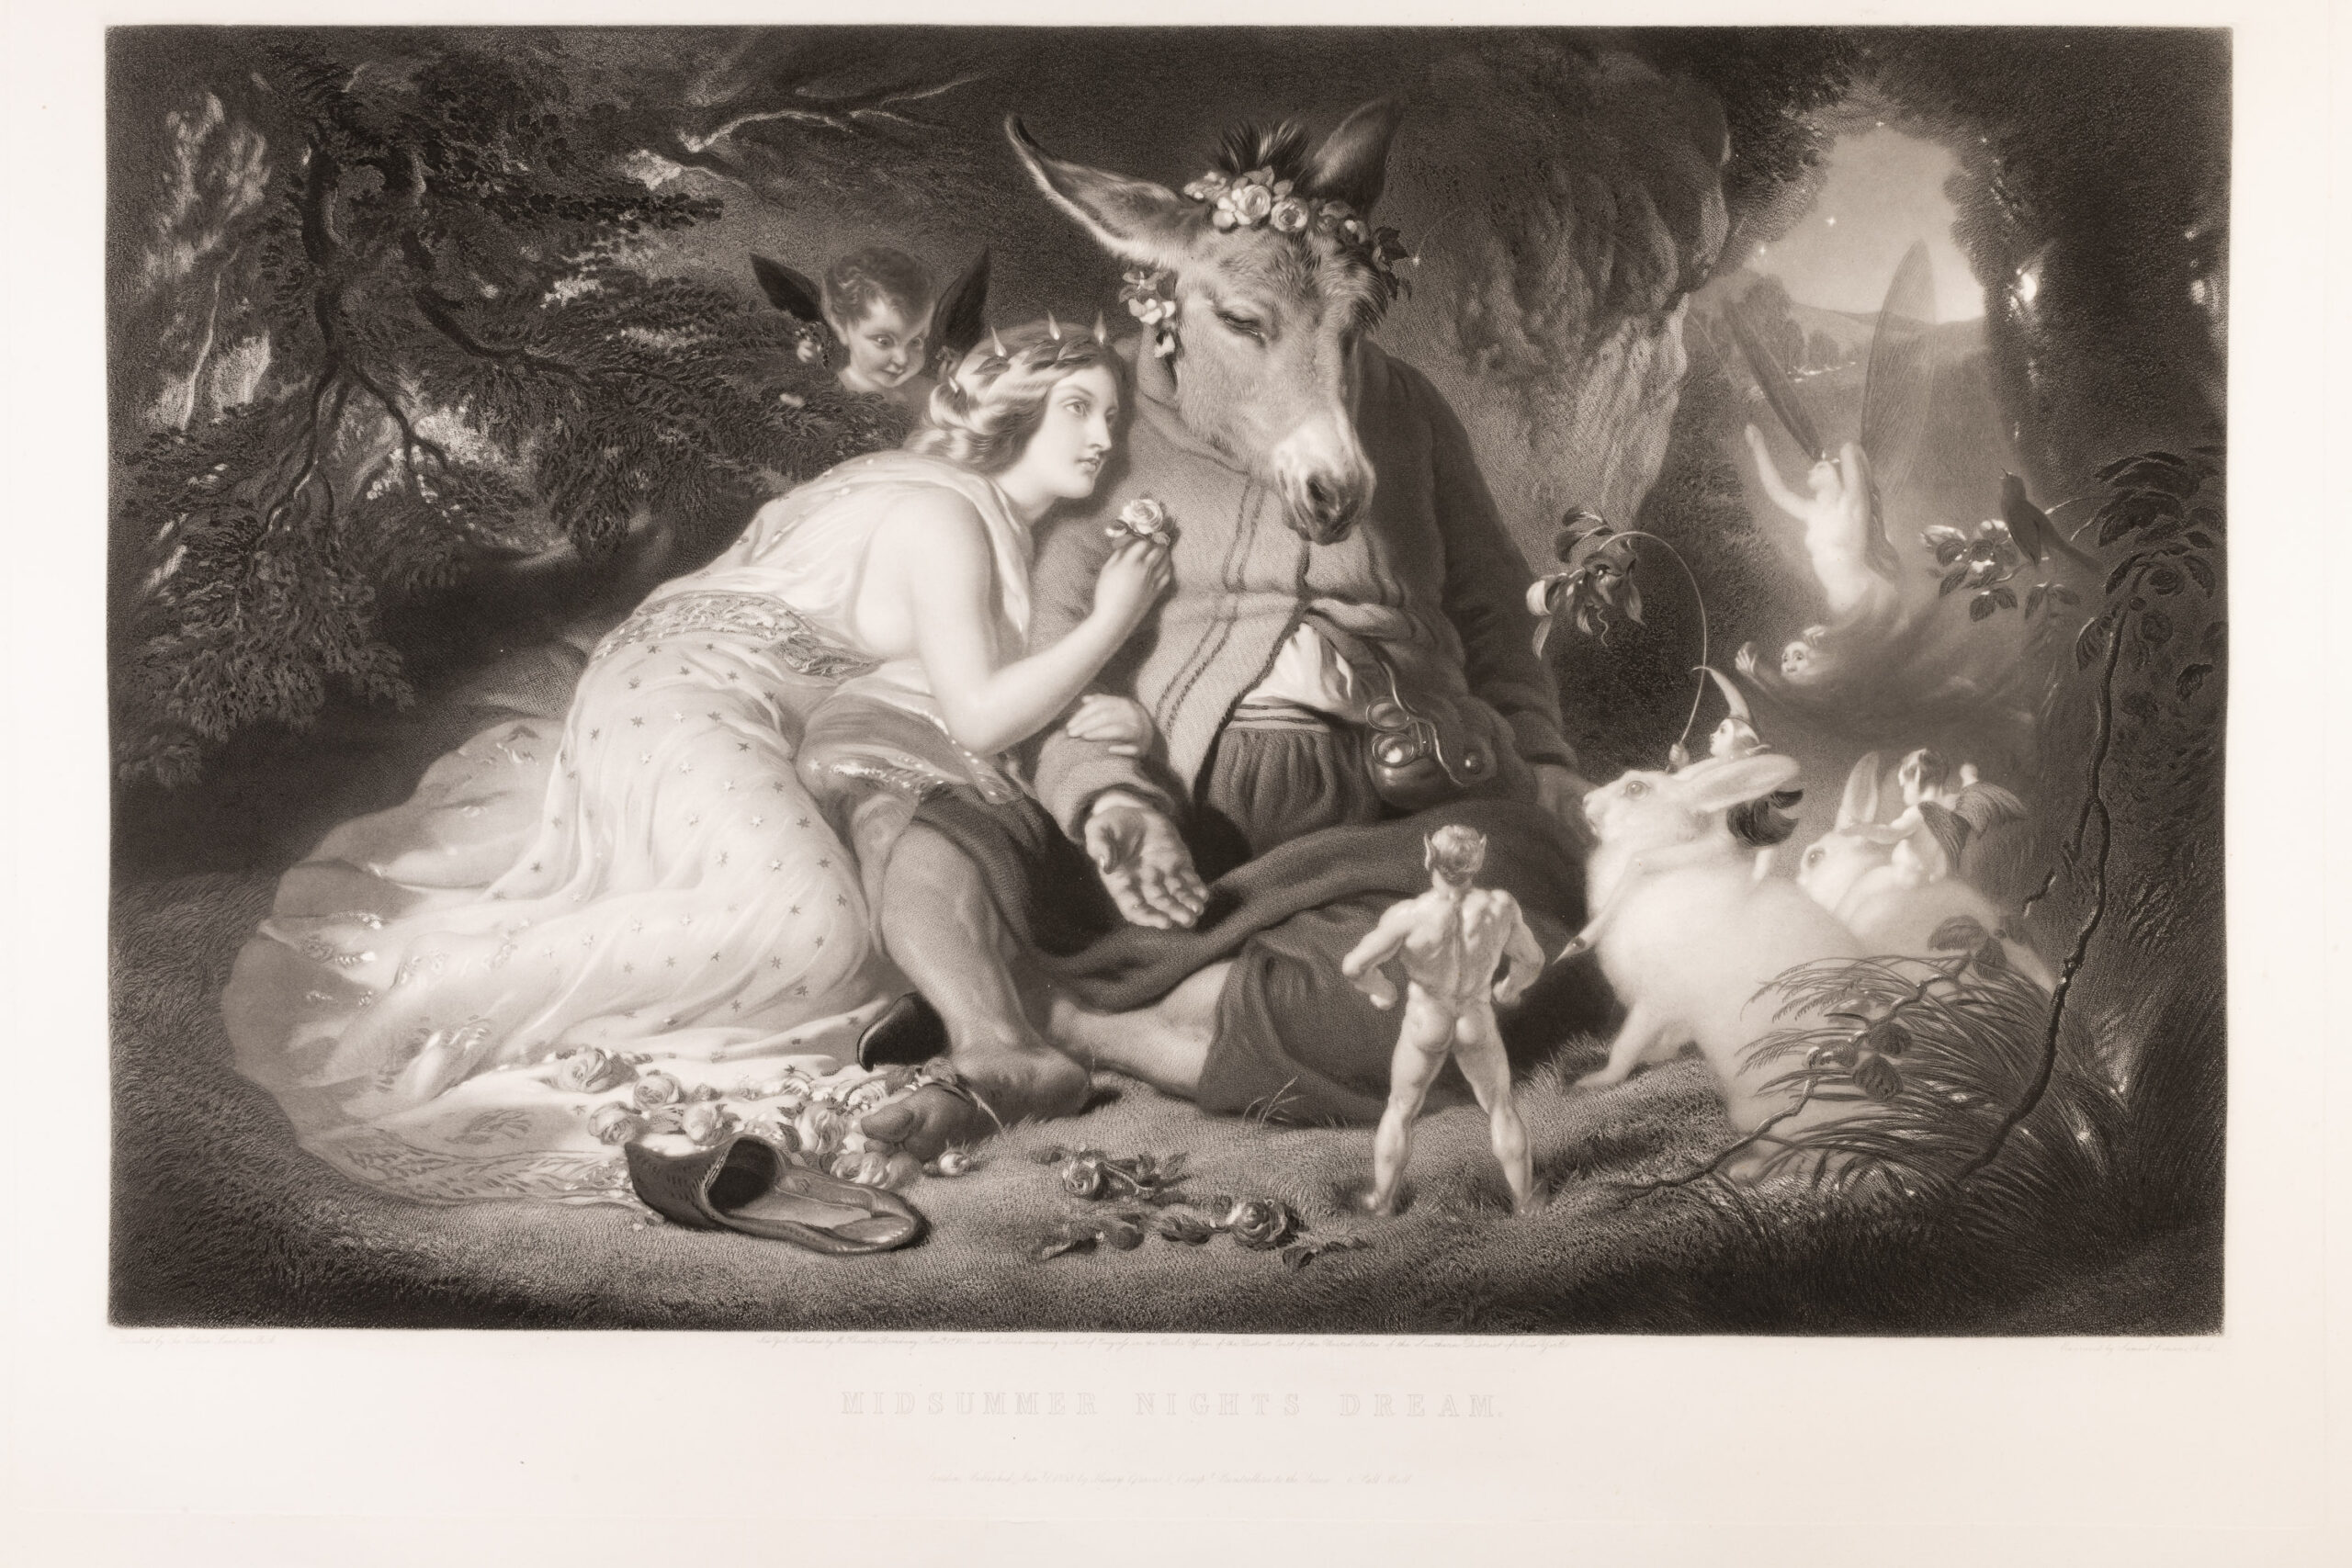 a print showing Bottom and Titania from Shakespeare's midsummer night's dream, huddled together in a fairytale woodland scene